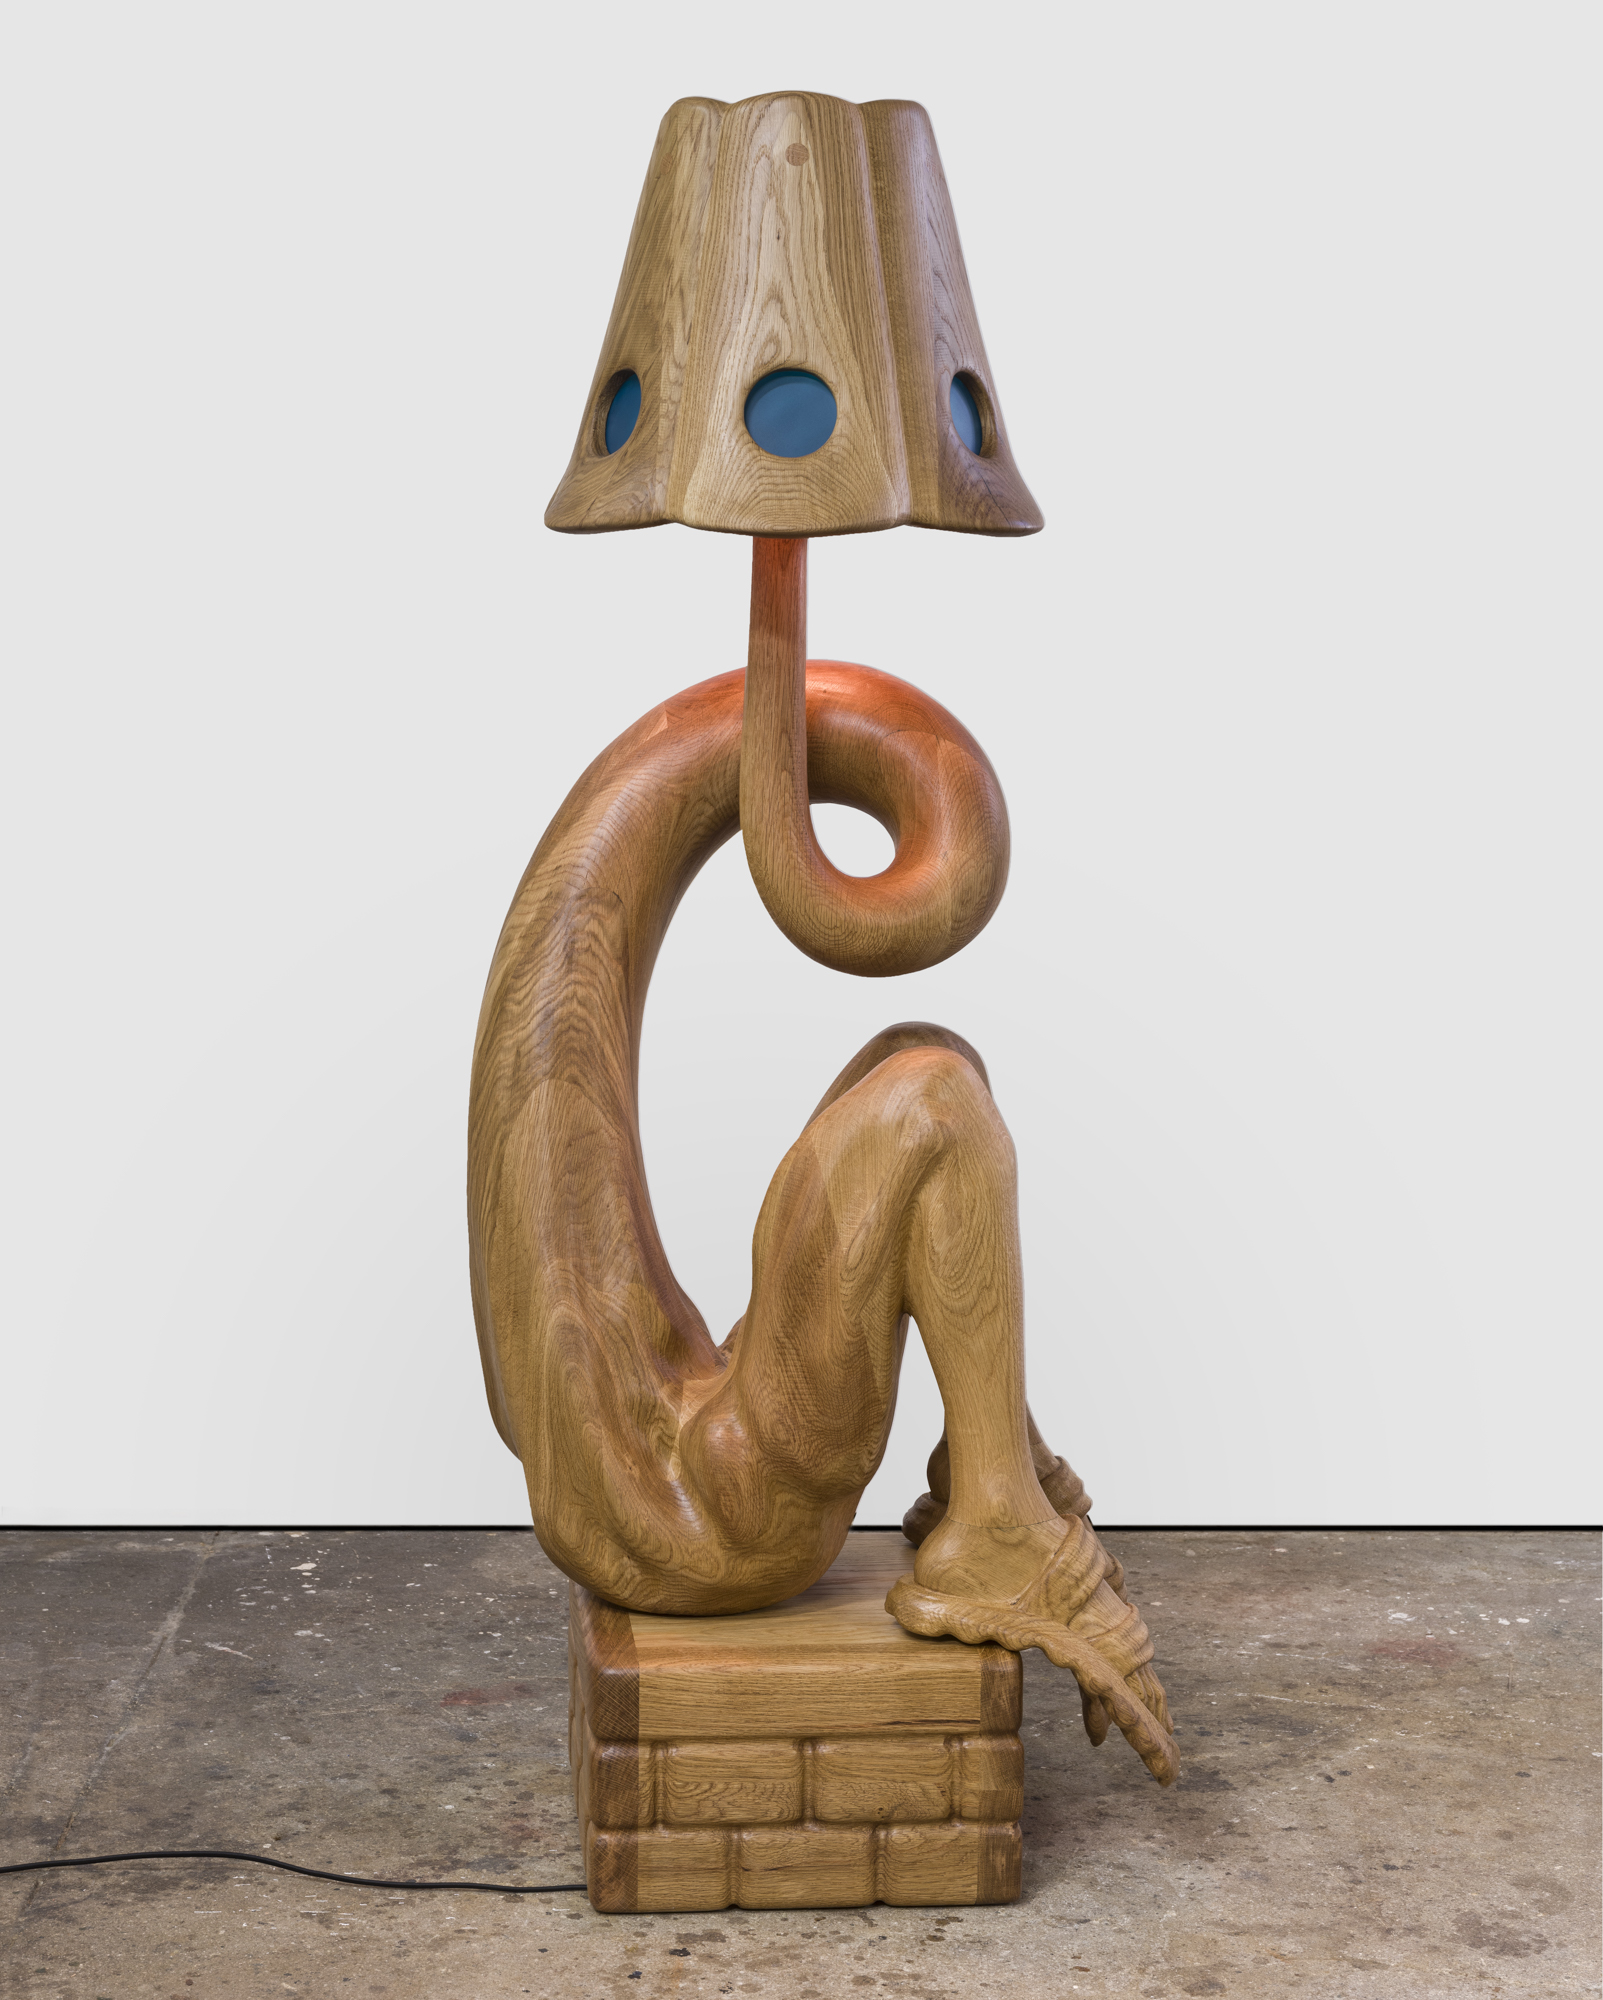 A wooden anthropomorphic lamp